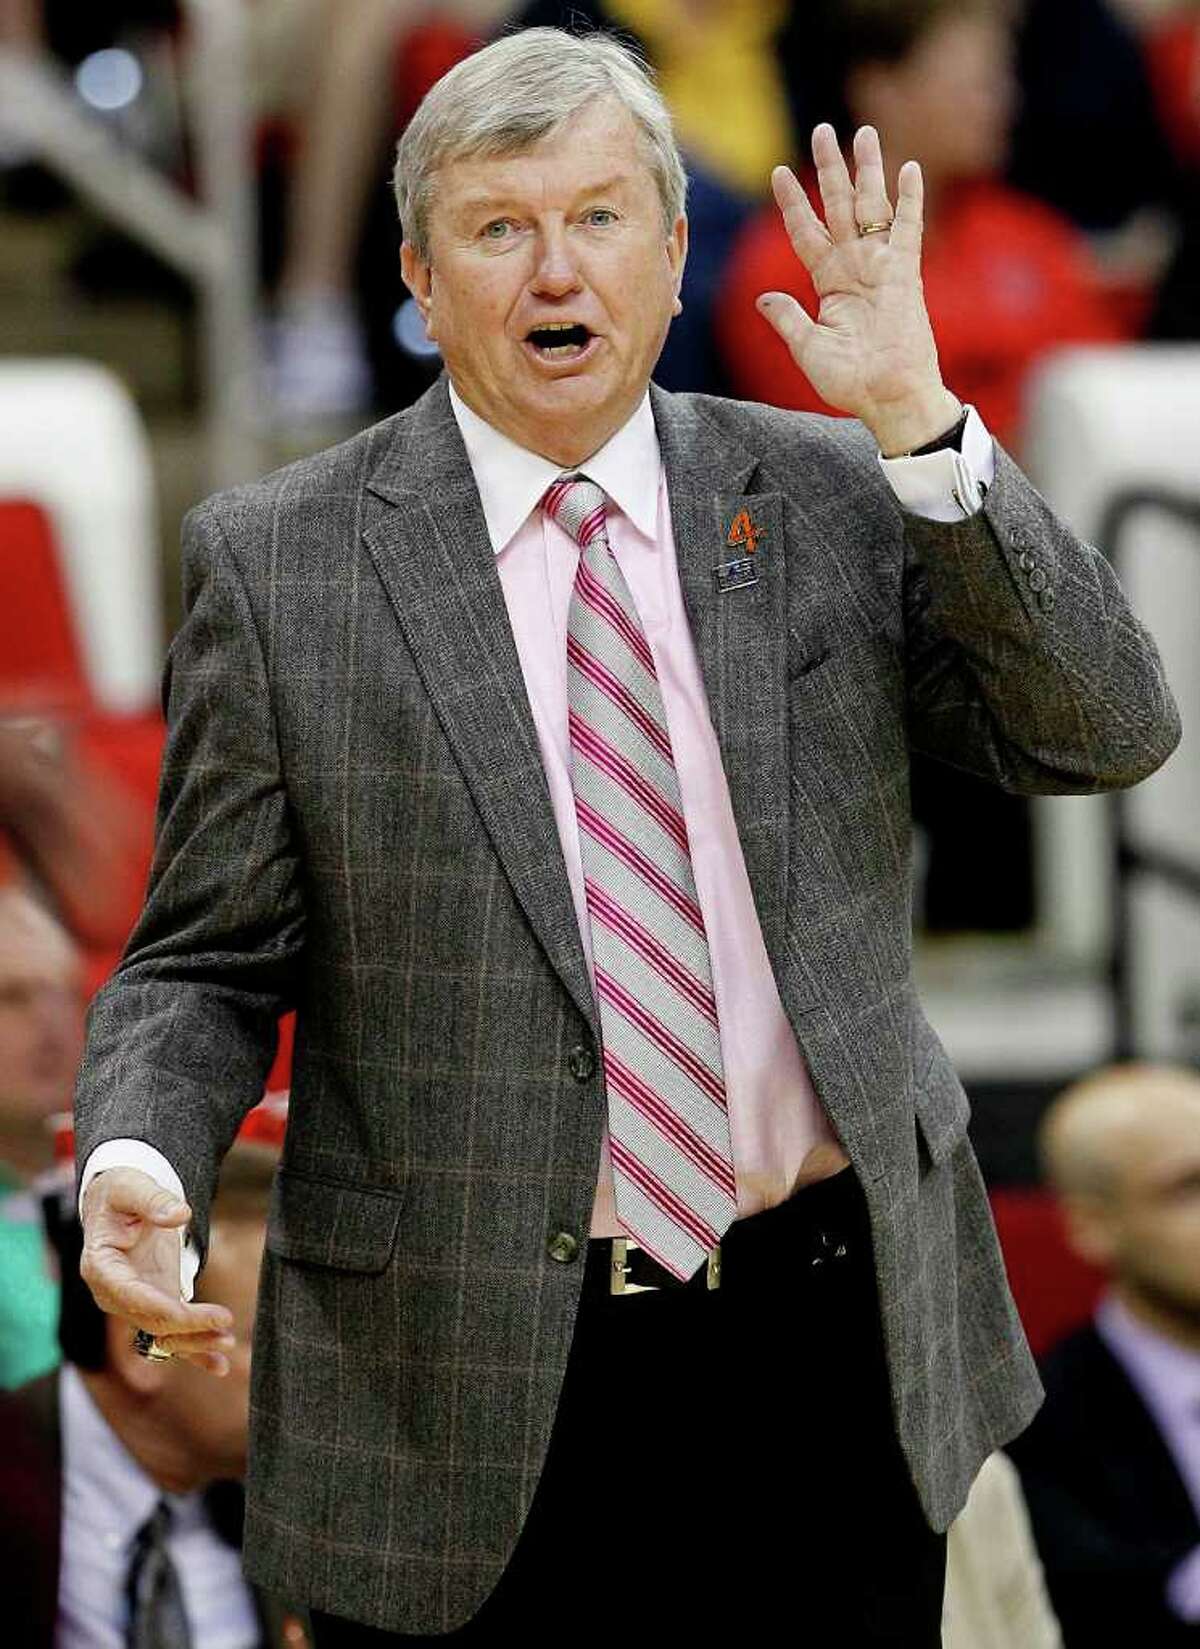 Texas A&M coach Gary Blair directs his team during the first half of an NCAA college women's tournament regional semifinal basketball game against Maryland in Raleigh, N.C., Sunday, March 25, 2012. Maryland won 81-74. (AP Photo/Gerry Broome)